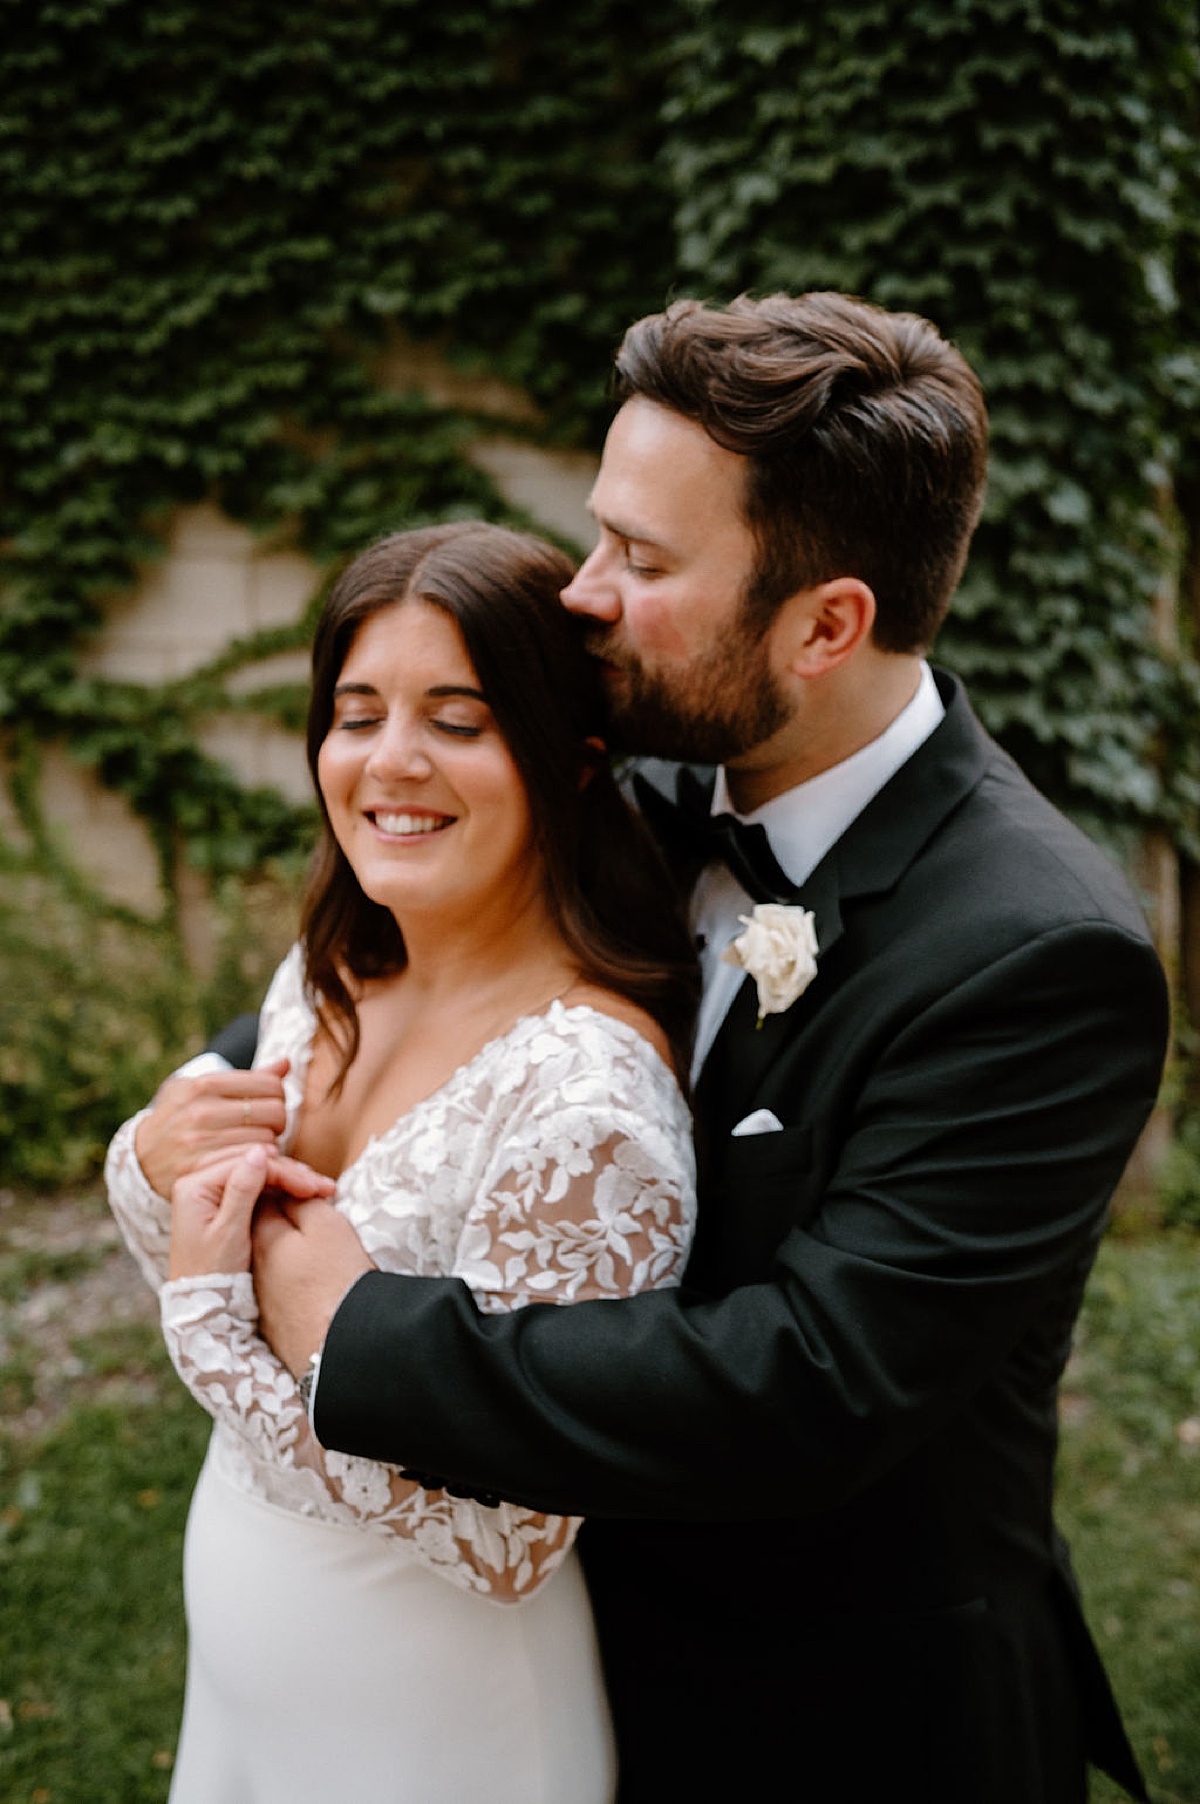 groom kisses bride in front of ivy wall after elegant boho ceremony shot by Indigo Lace Collective